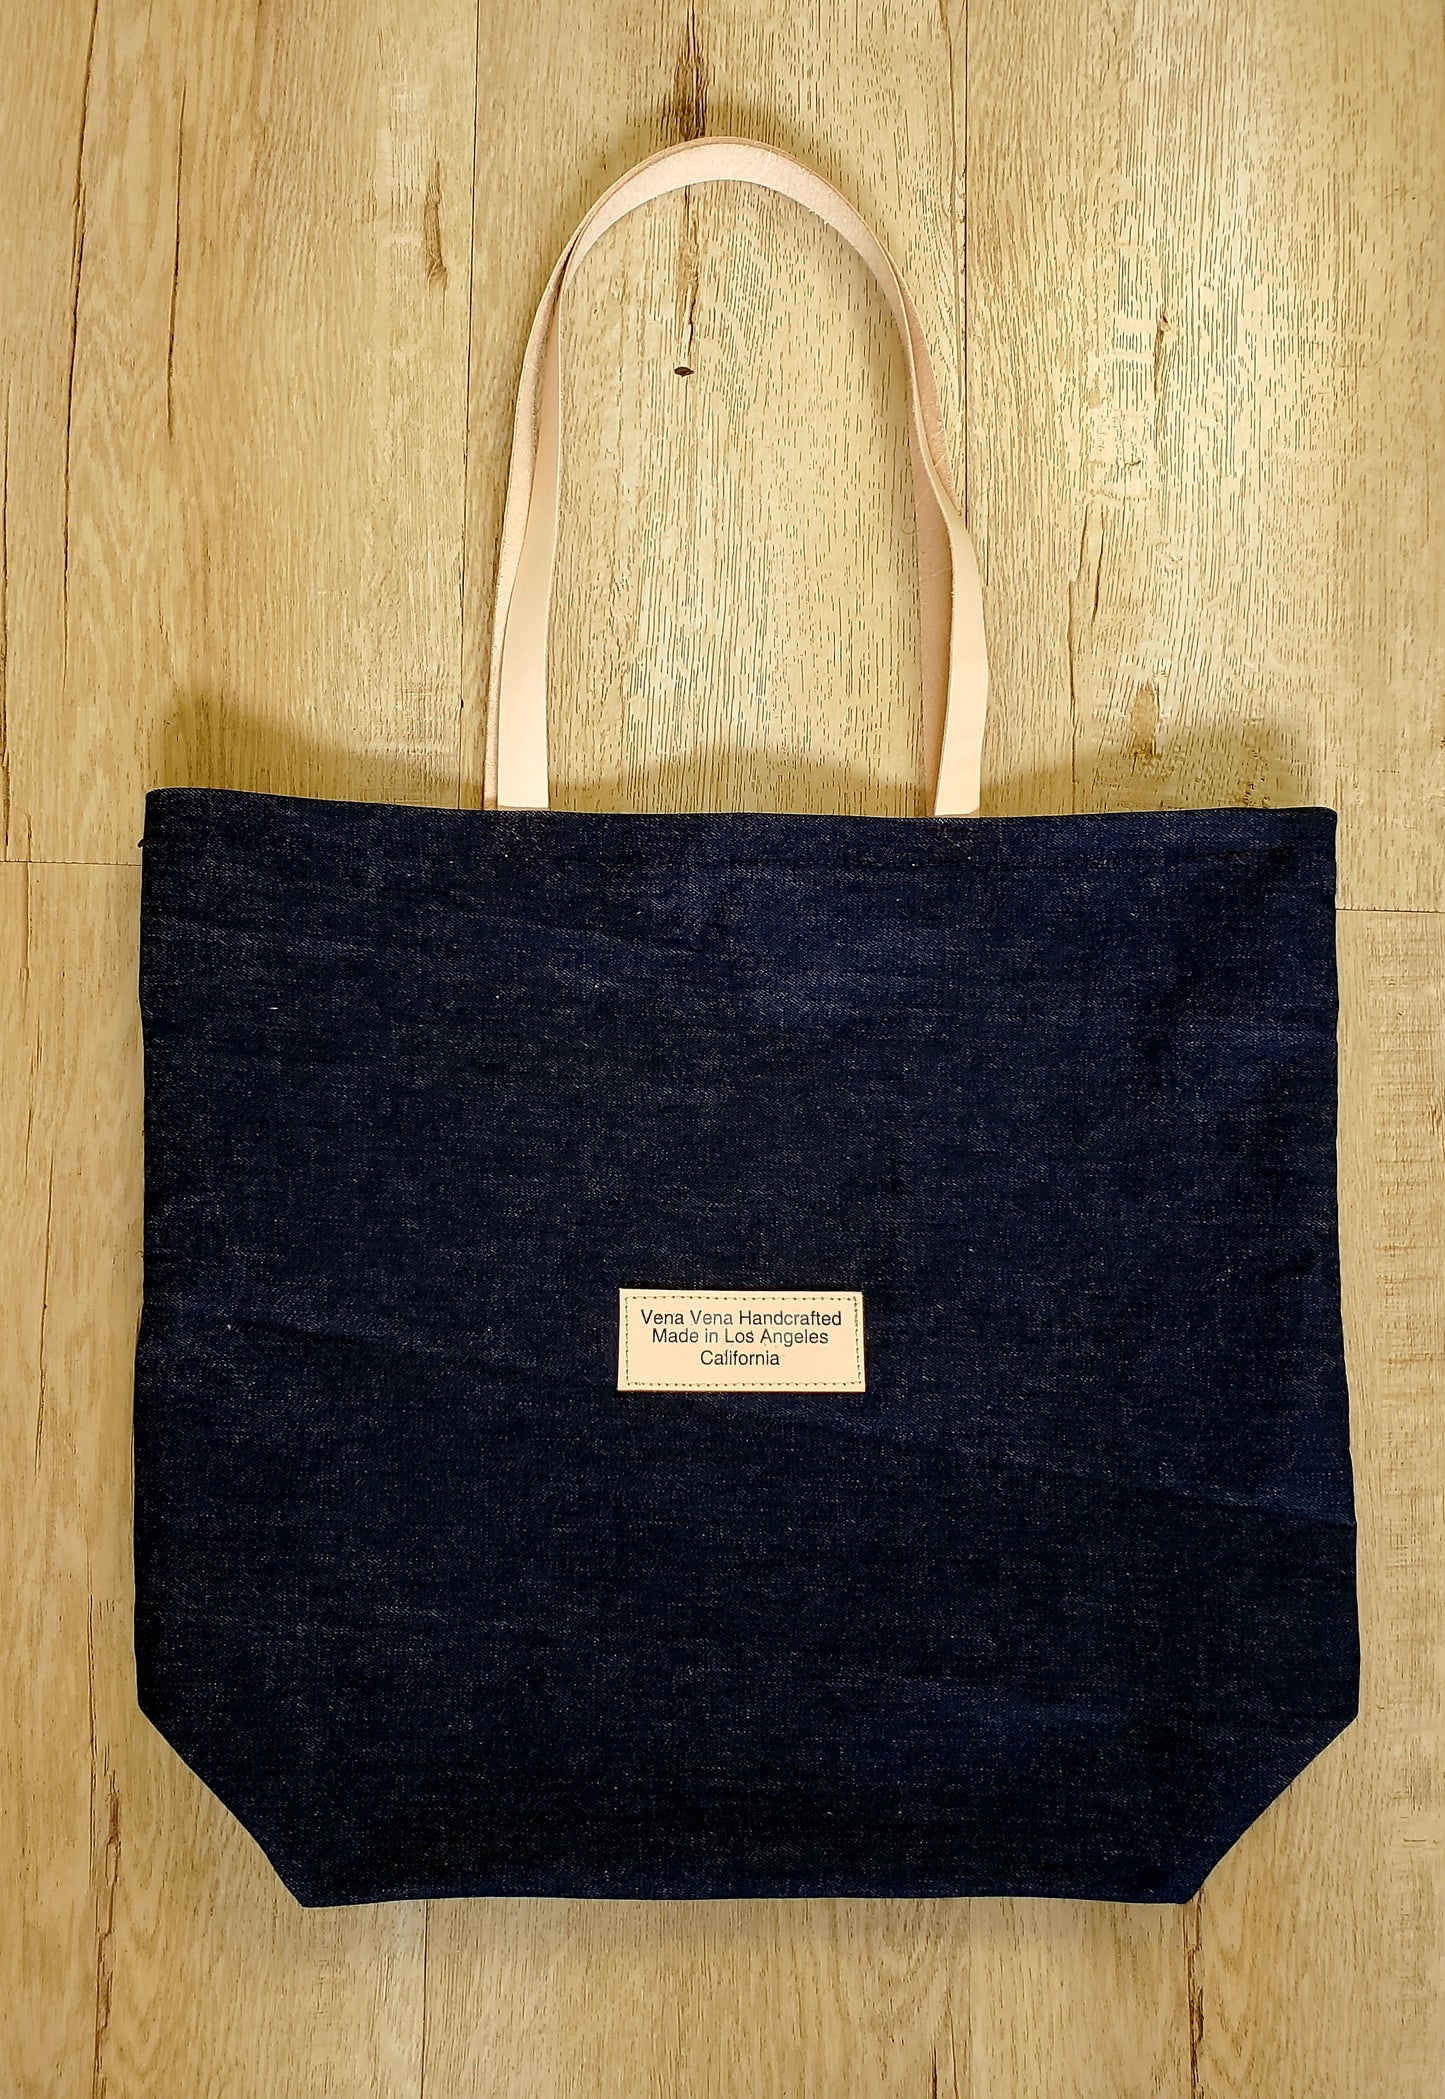 Dark denim tote bag with leather straps handmade in Los Angeles California